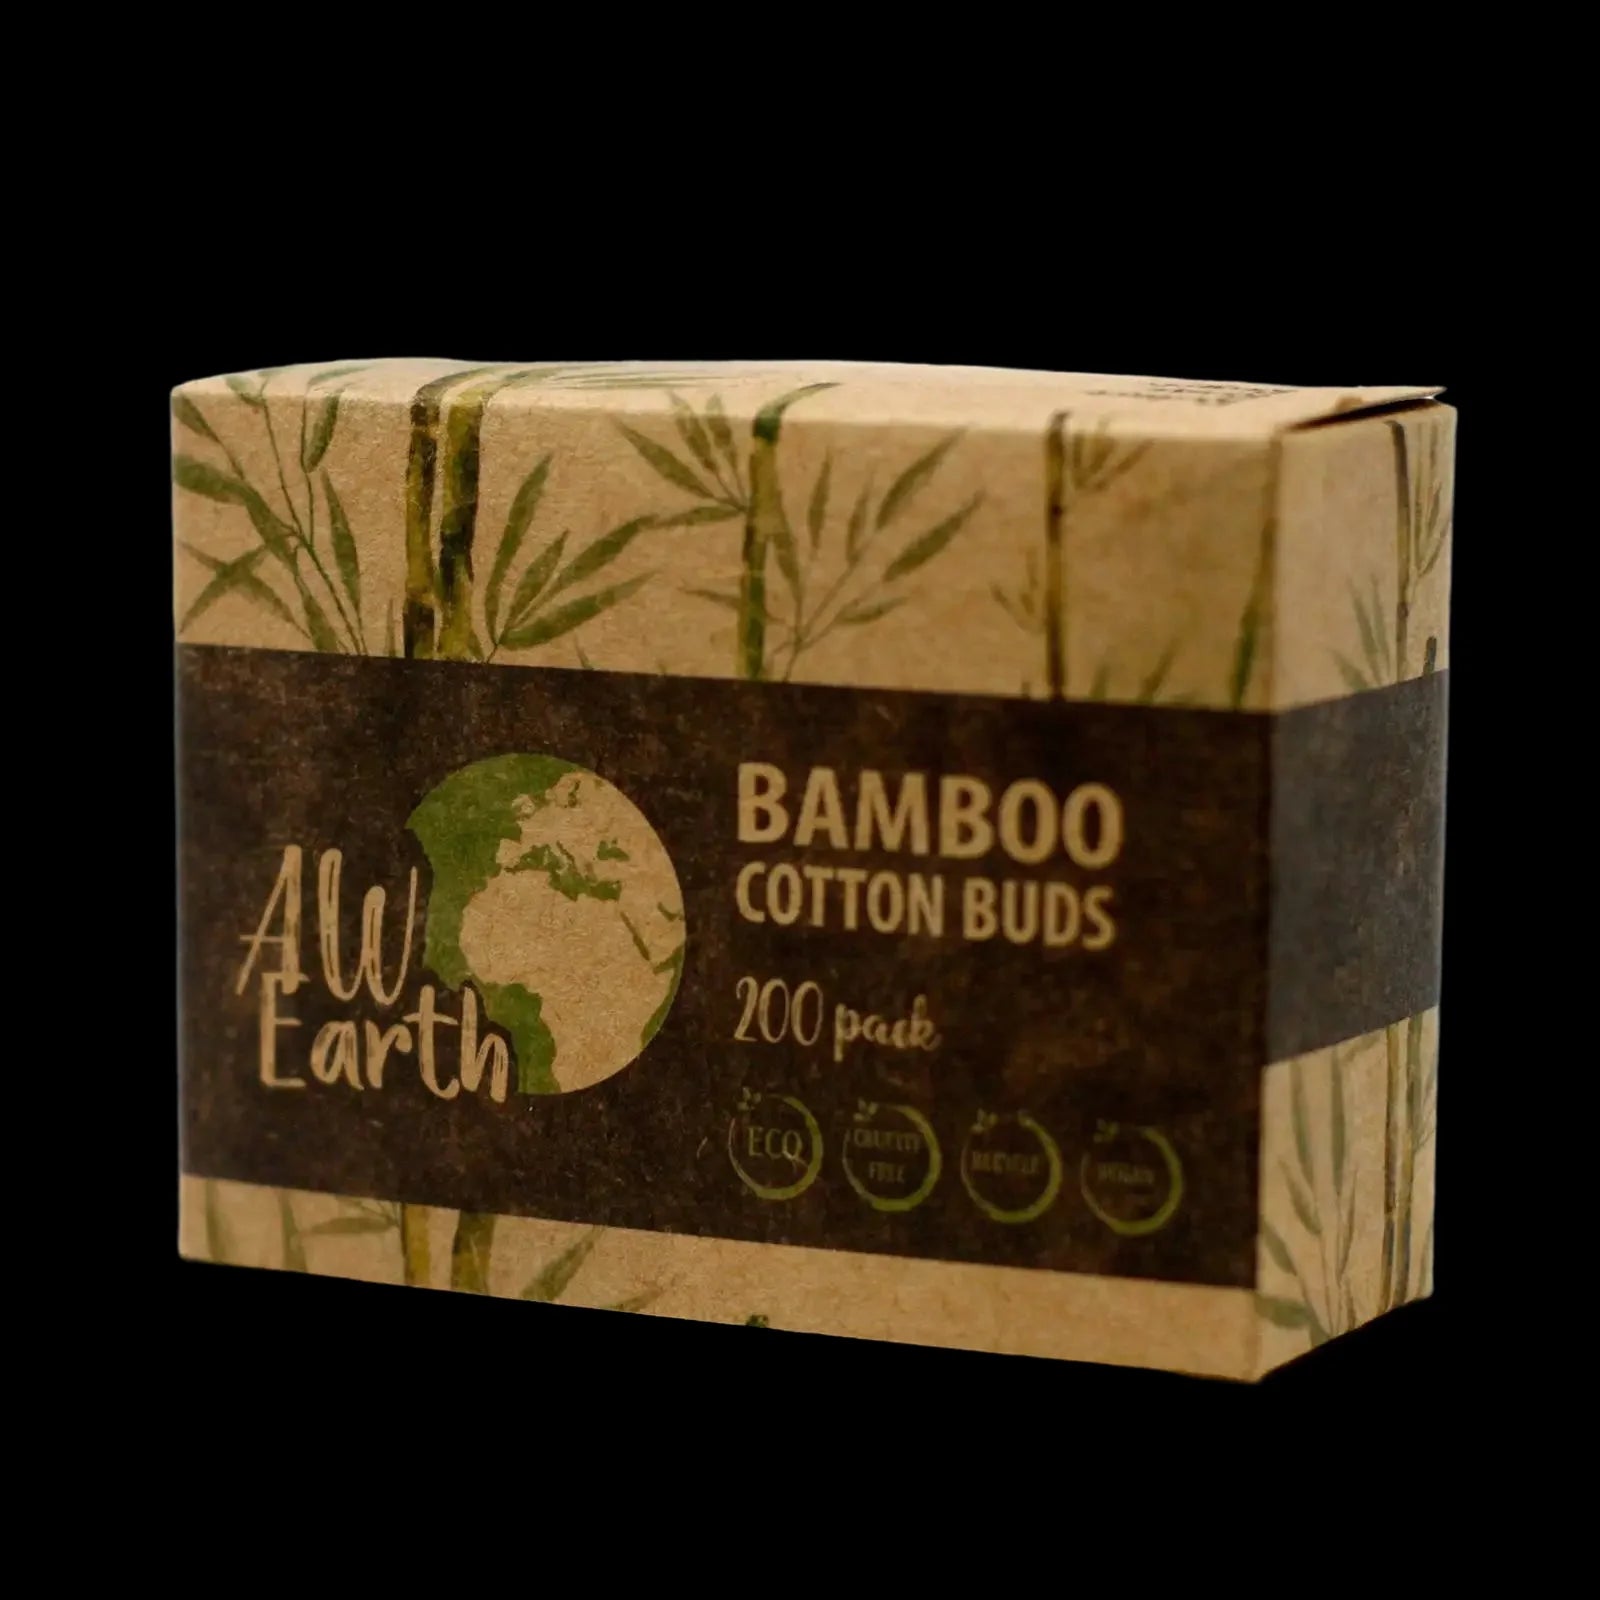 Box Of 200 Bamboo Cotton Buds - Ancient Wisdom - 2